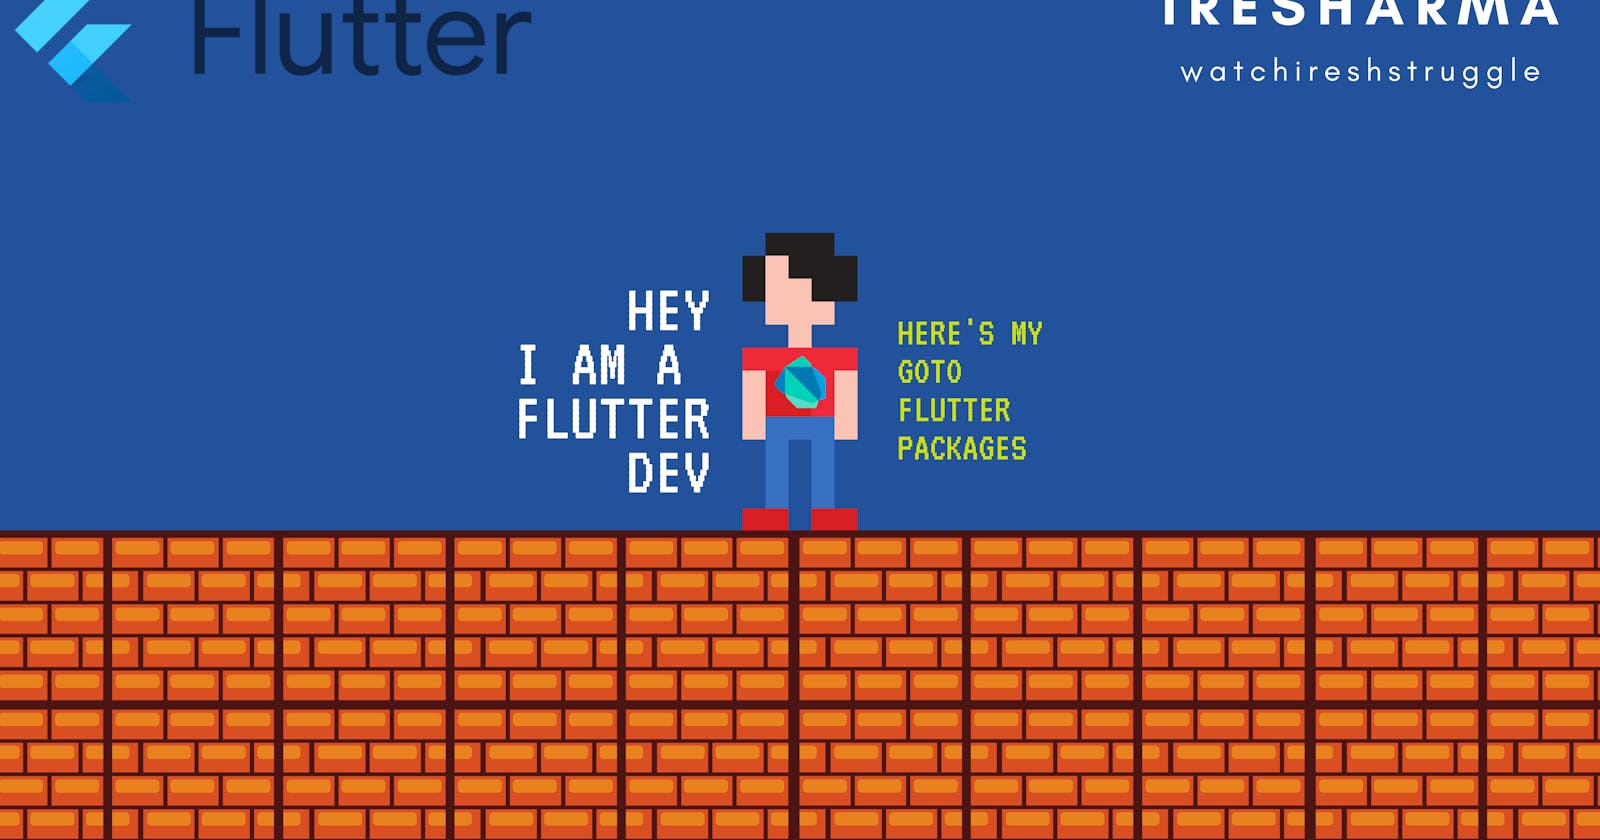 My goto flutter packages